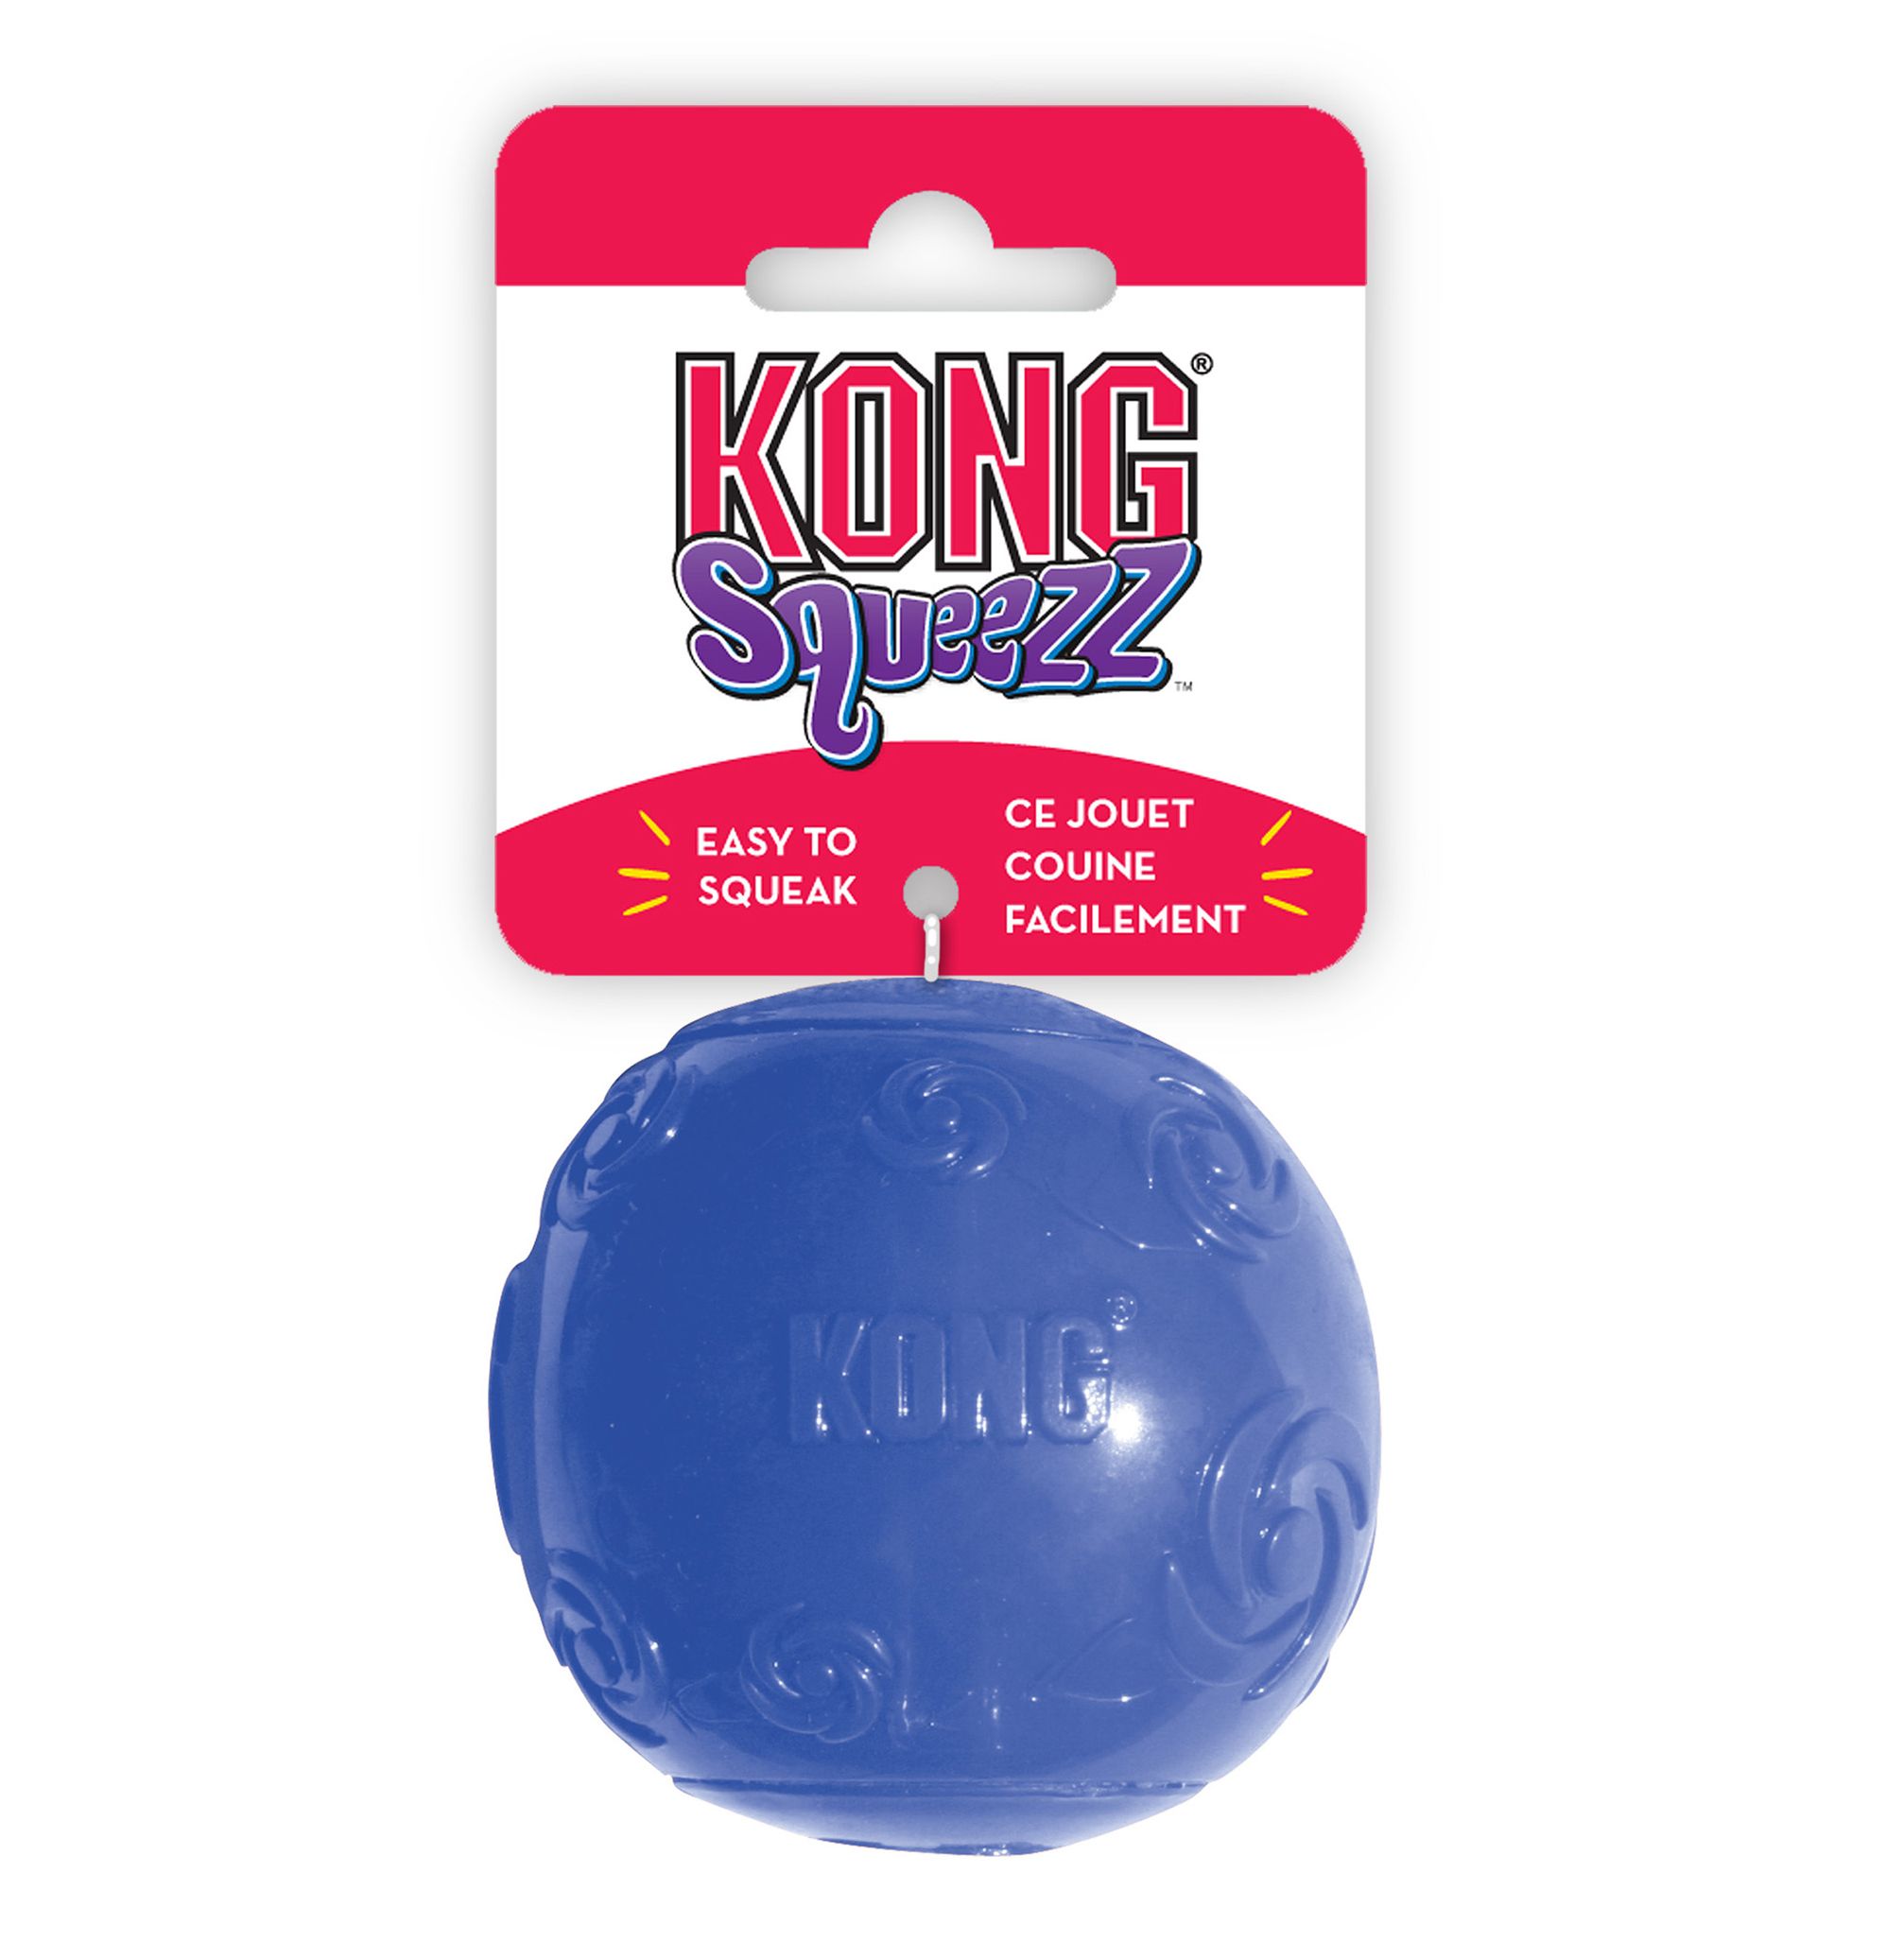 squeaky ball dog toy